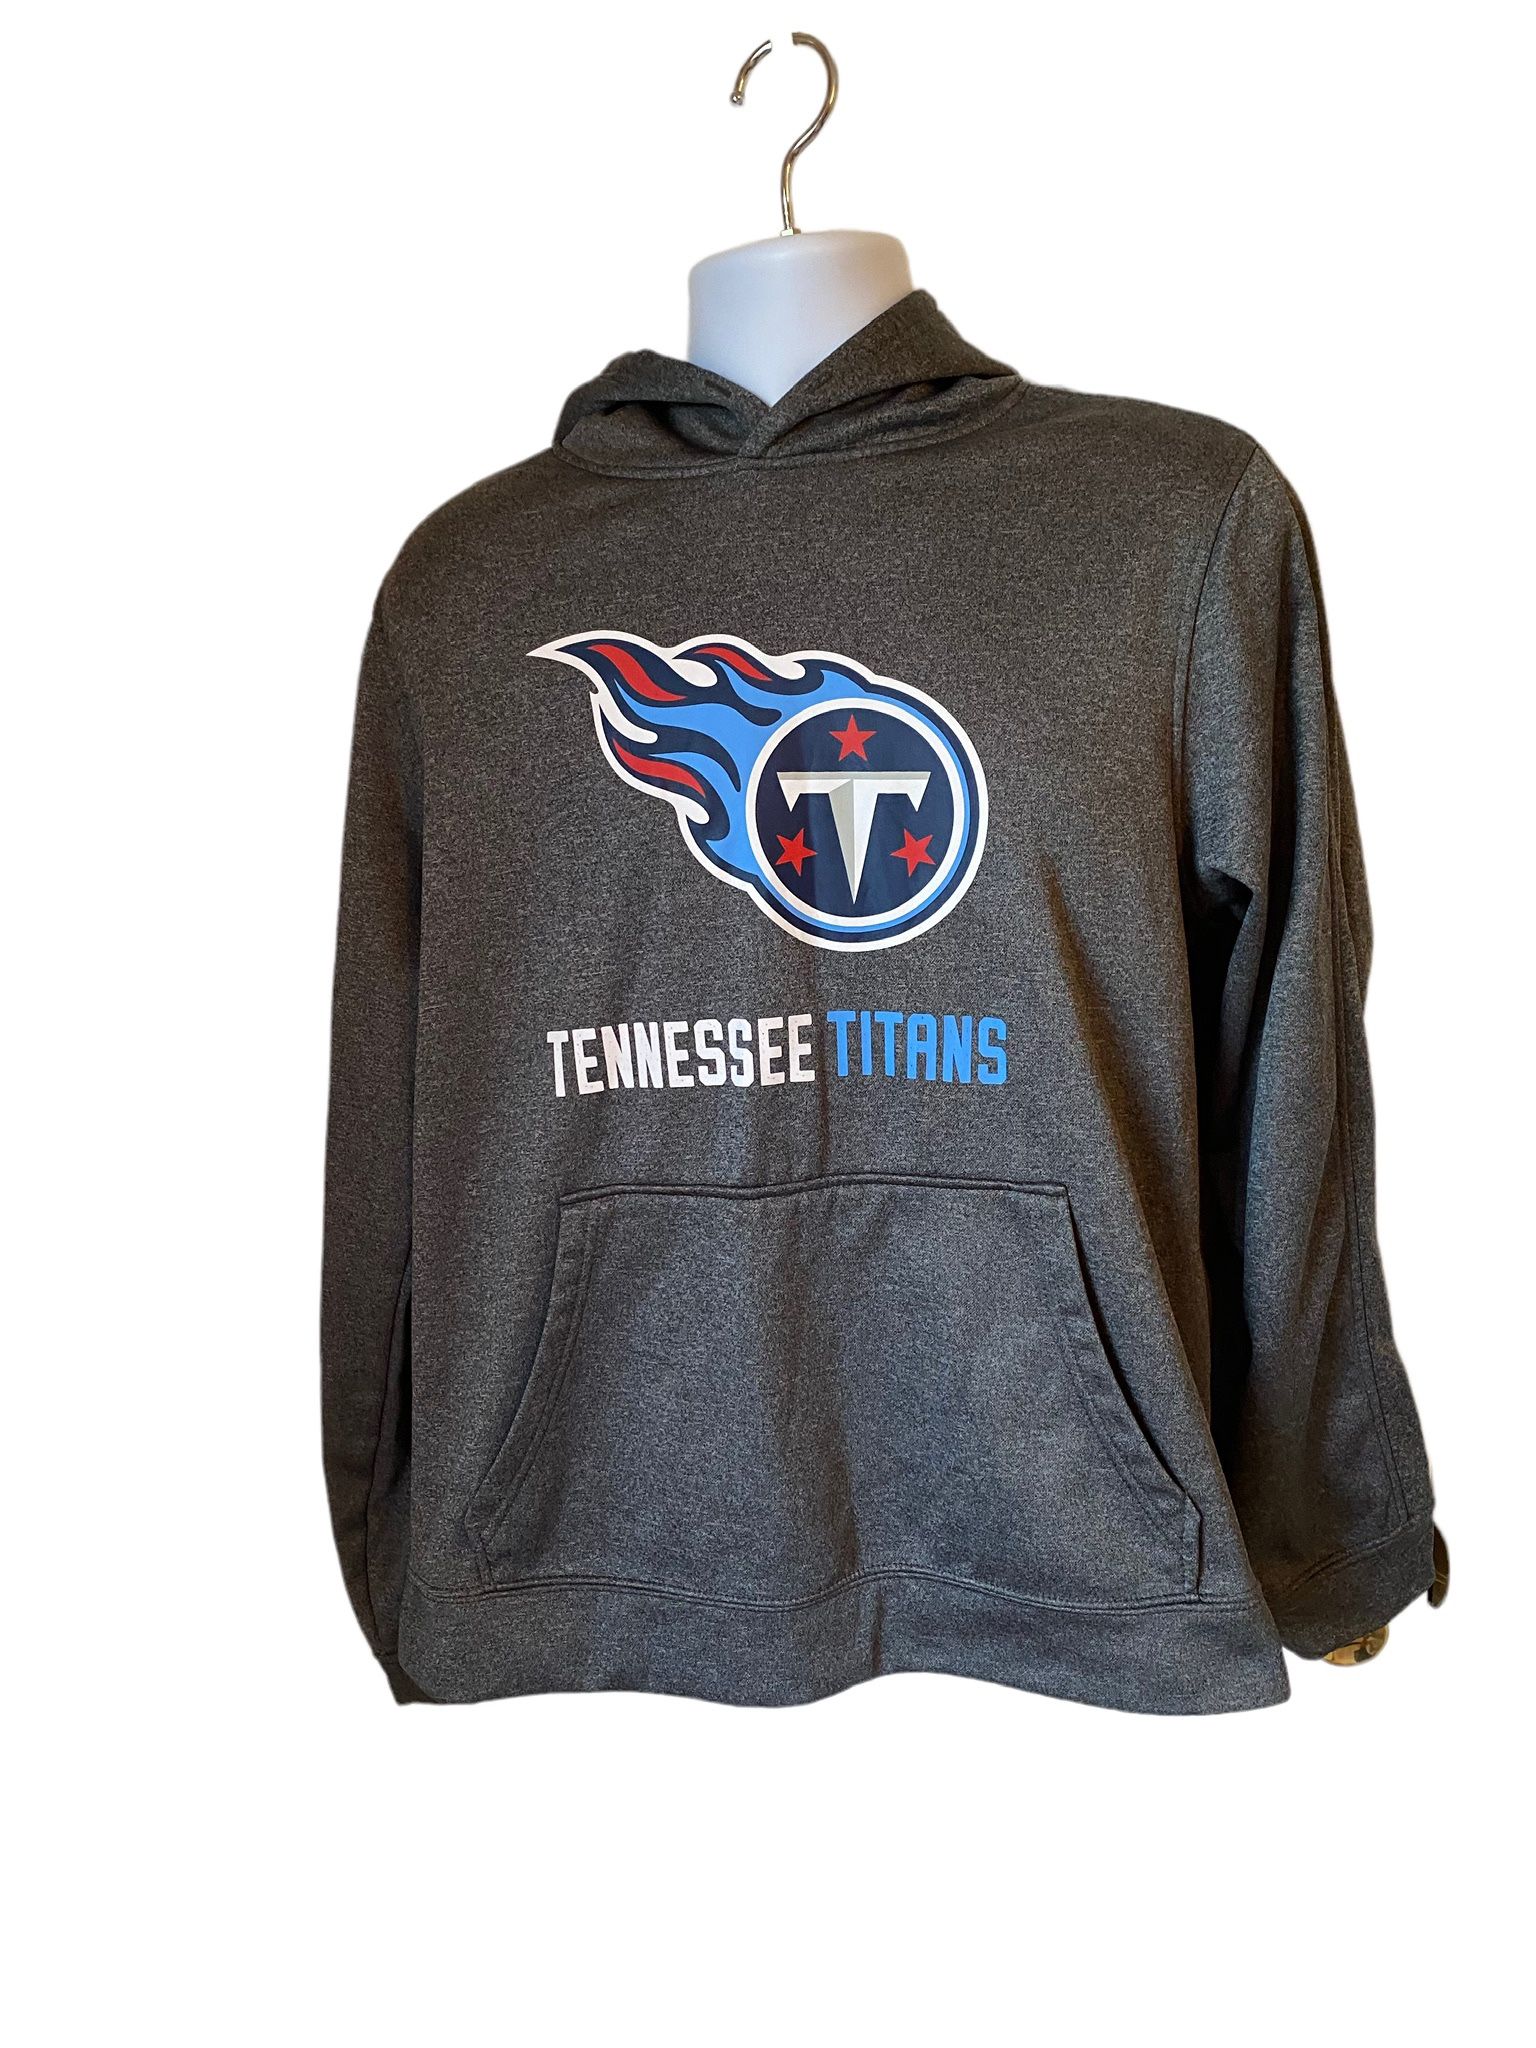 Men’s NFL Tennessee Titans hoodie jacket size large